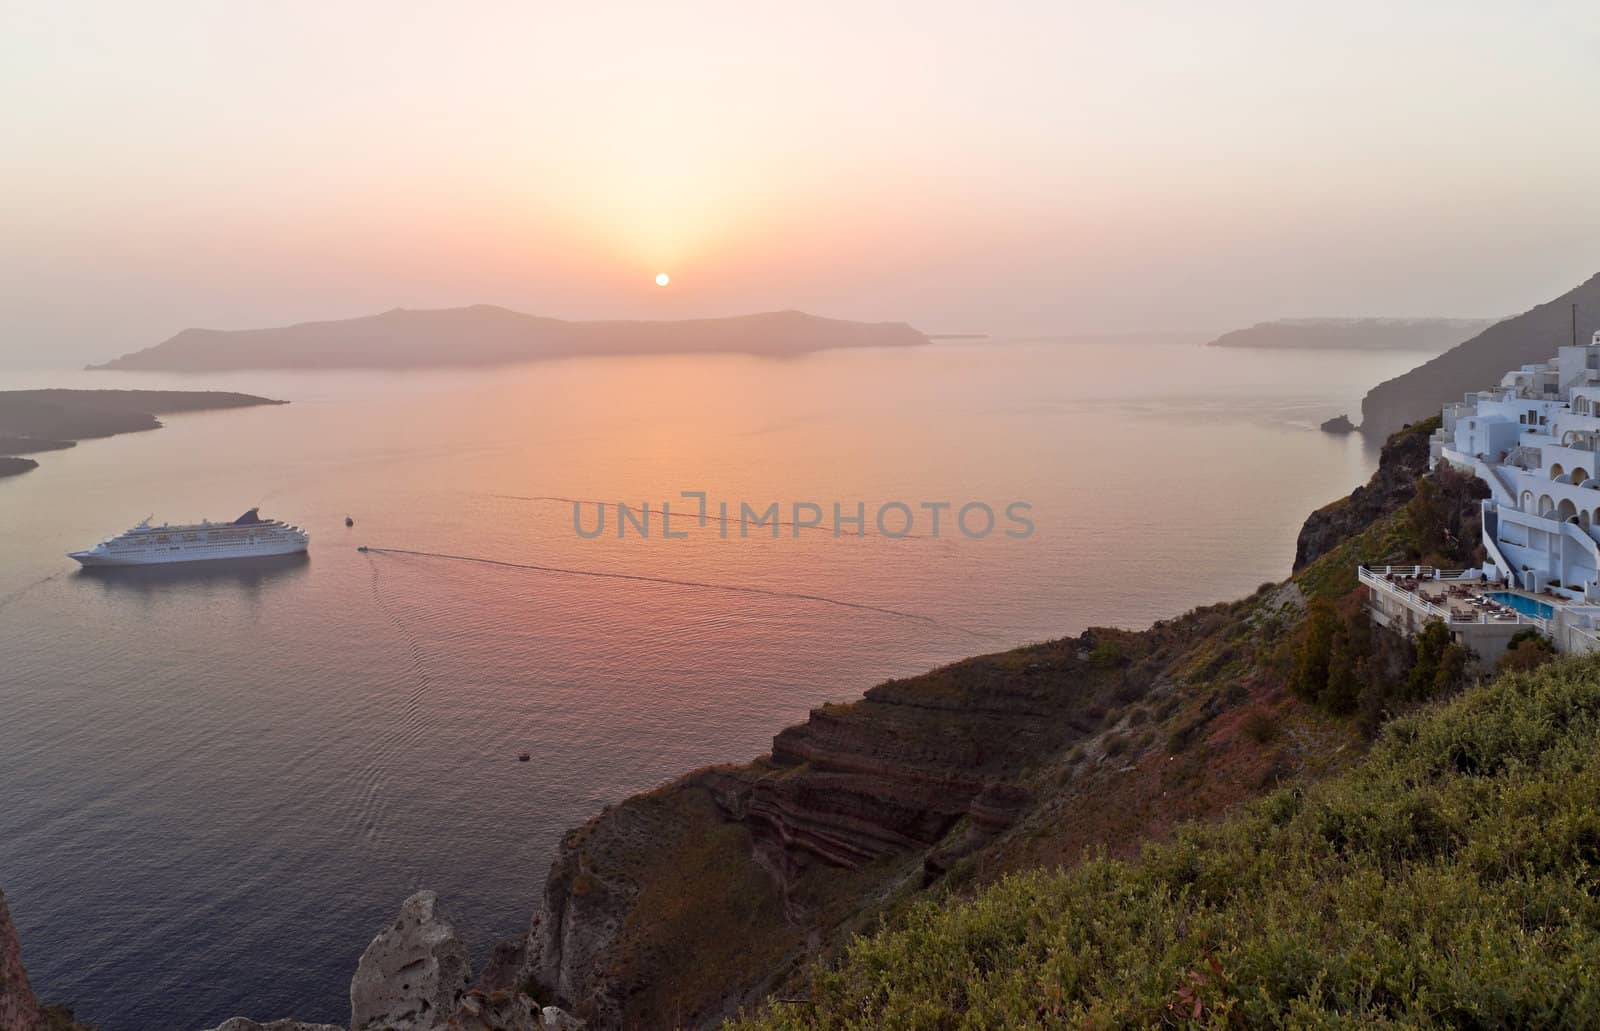 Santorini sunset in Thira with the ship coming to the island